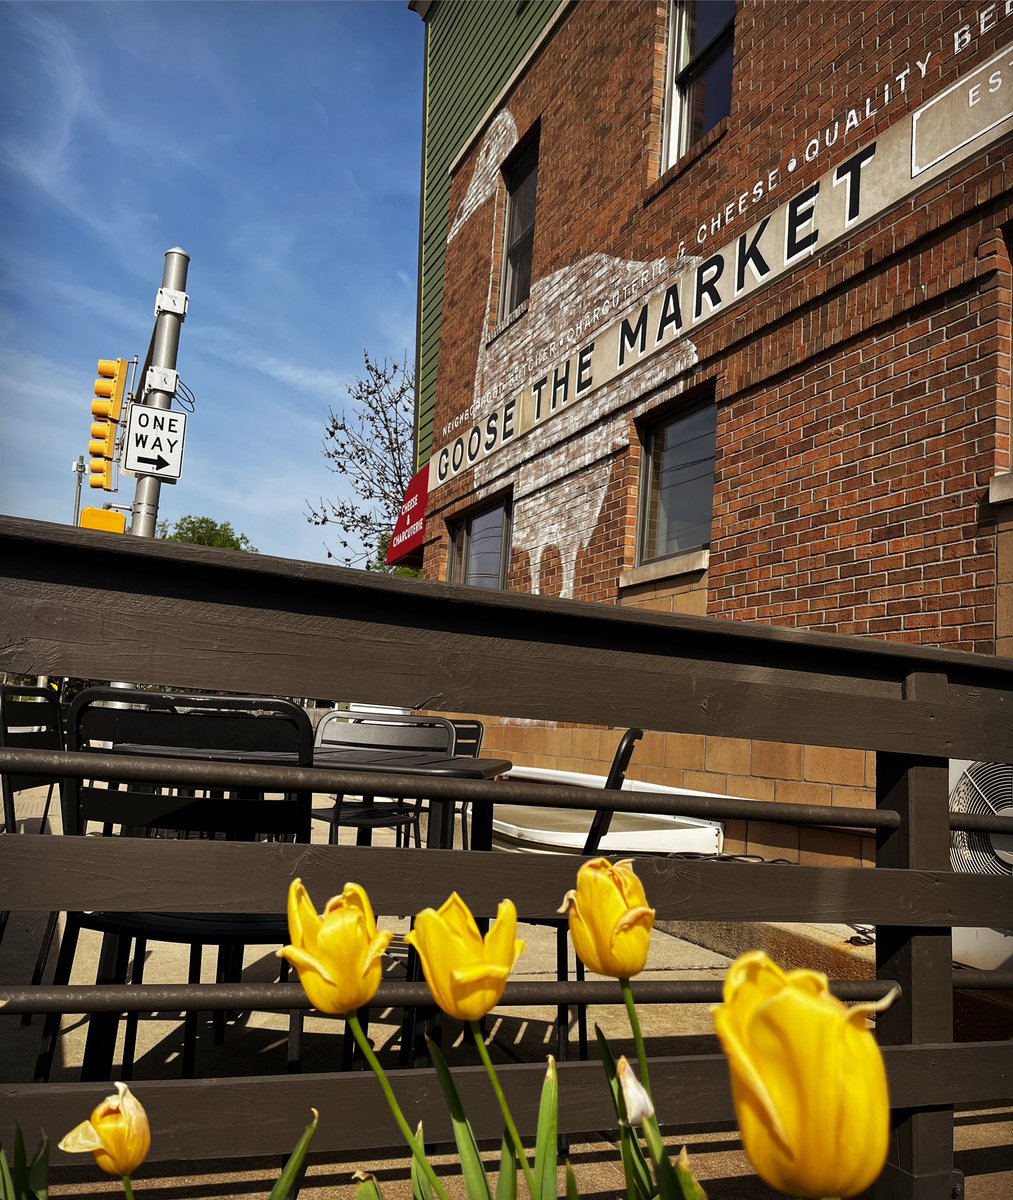 Patio’s open and spring’s blooming in beautiful @FallCreekPlace See you thru 7pm tonight: Free Double Stamps on frequent sandwich card w/order today #TwoStampTuesday all beer 15% off 🍻 #TuesdaySpecials #NowHiring! Part-time Braista and Cheesemonger goosethemarket.com